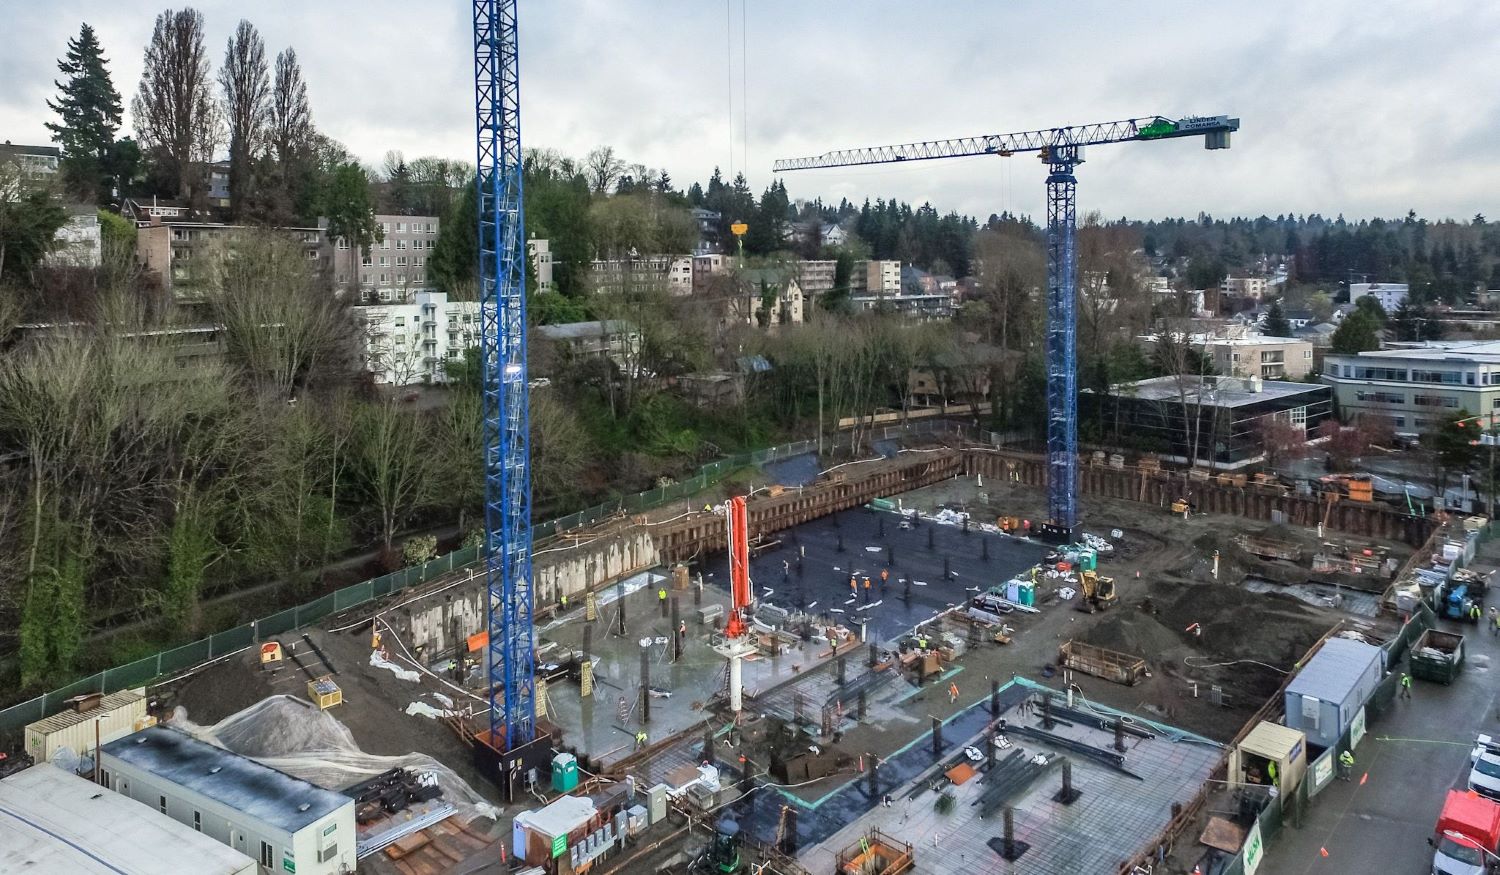 Walsh group team in foundation building progress in Seattle